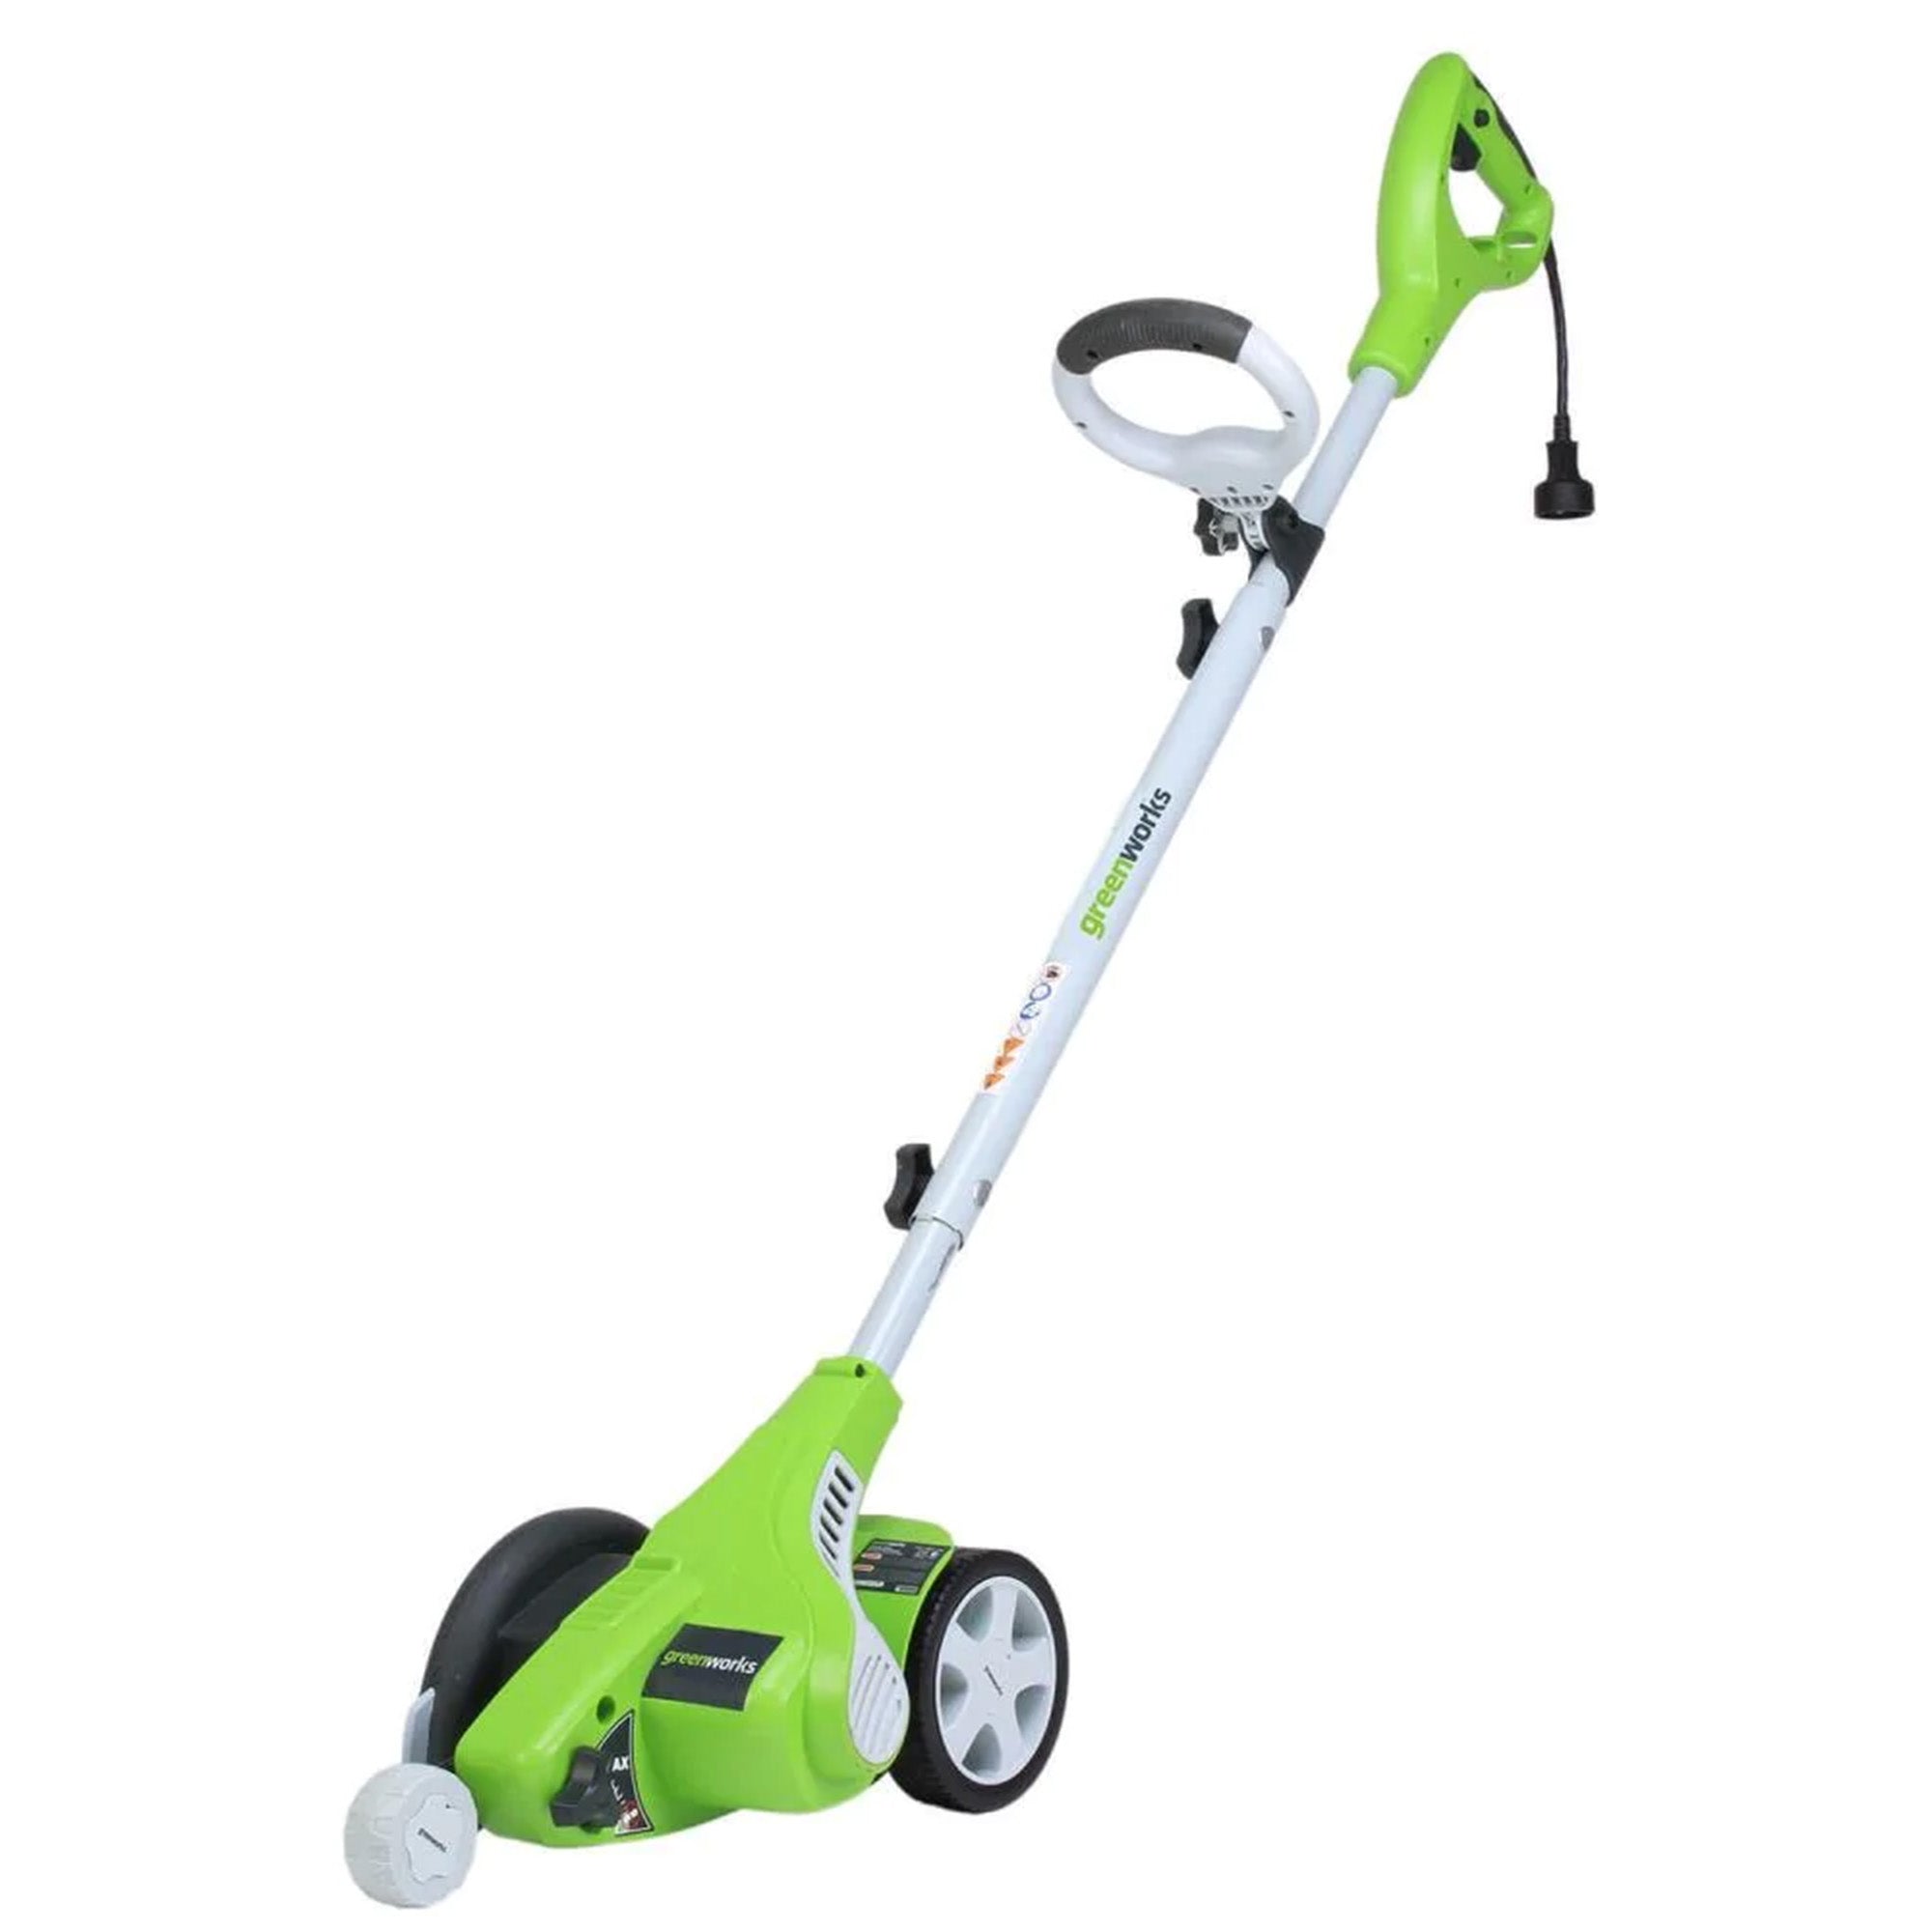 Greenworks 7.5-Inch Replacement Lawn Edger 29182